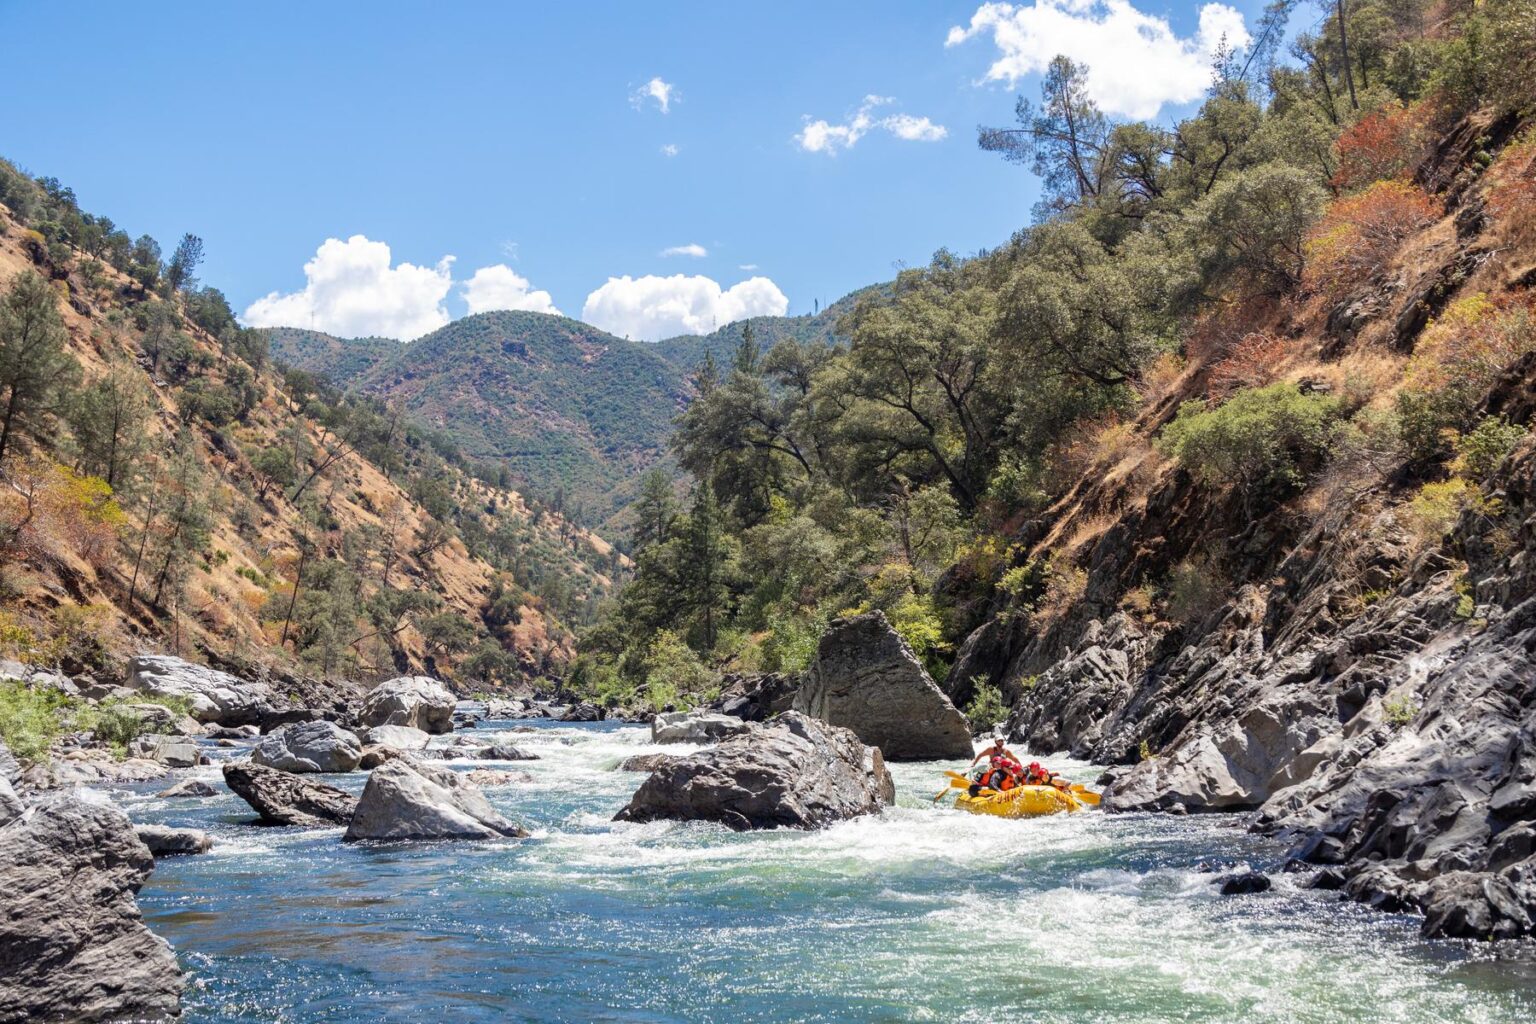 Rafting the Tuolumne River on an OARS 2-day trip